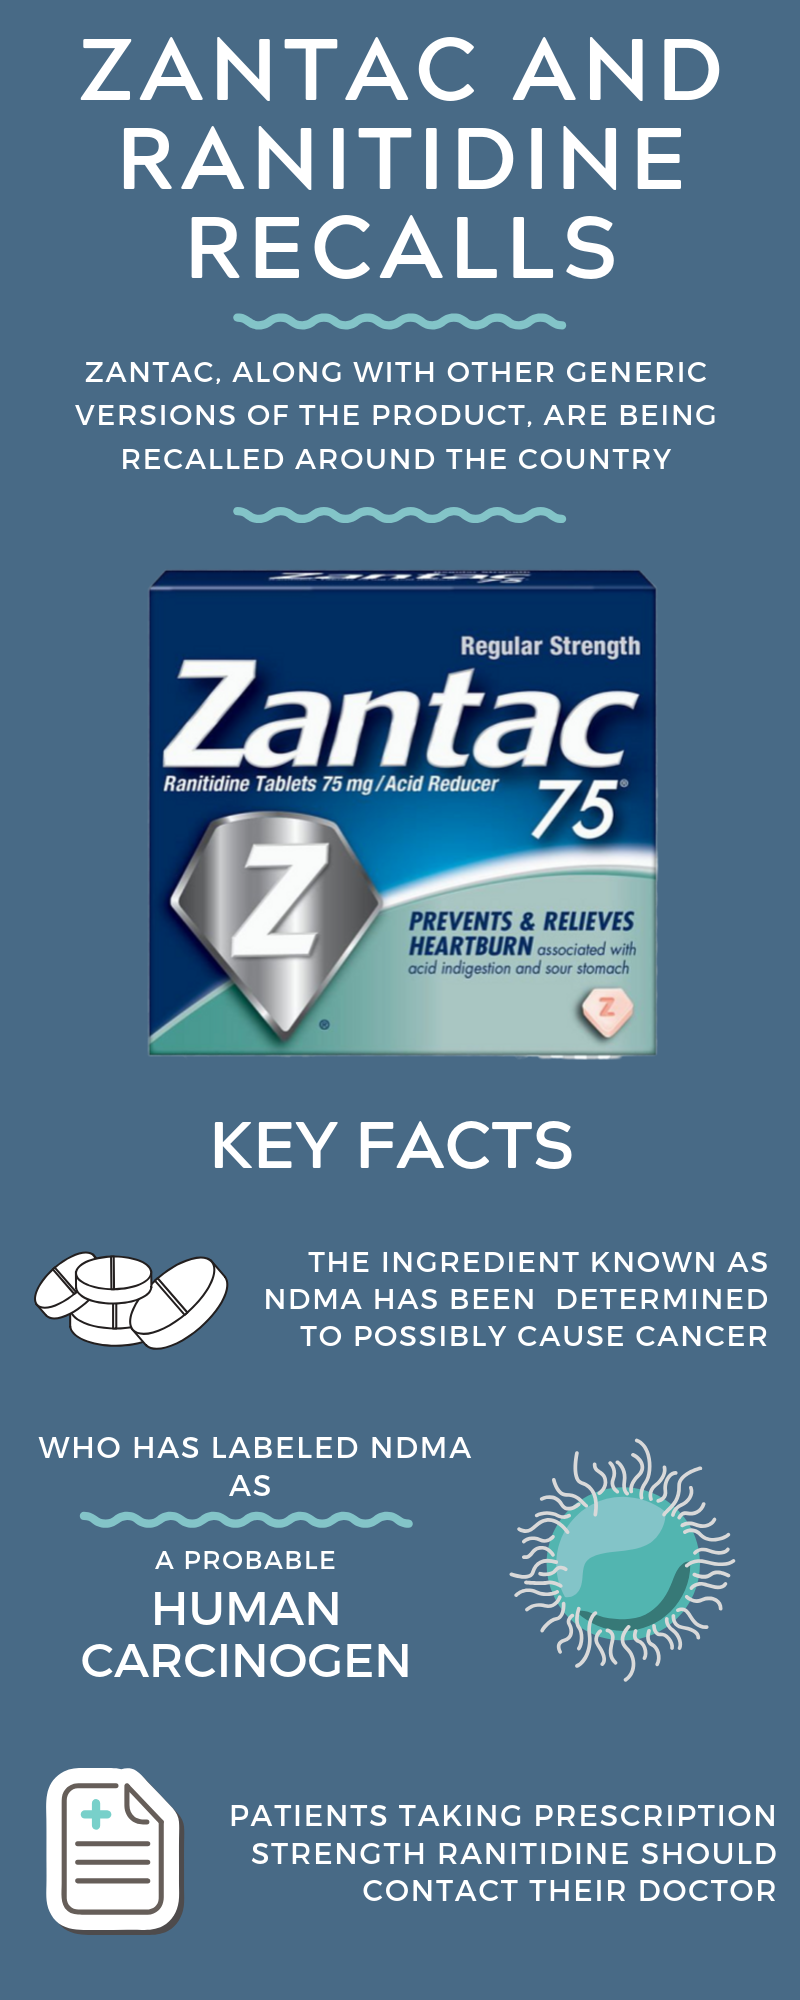 what kind of cancer does zantac cause